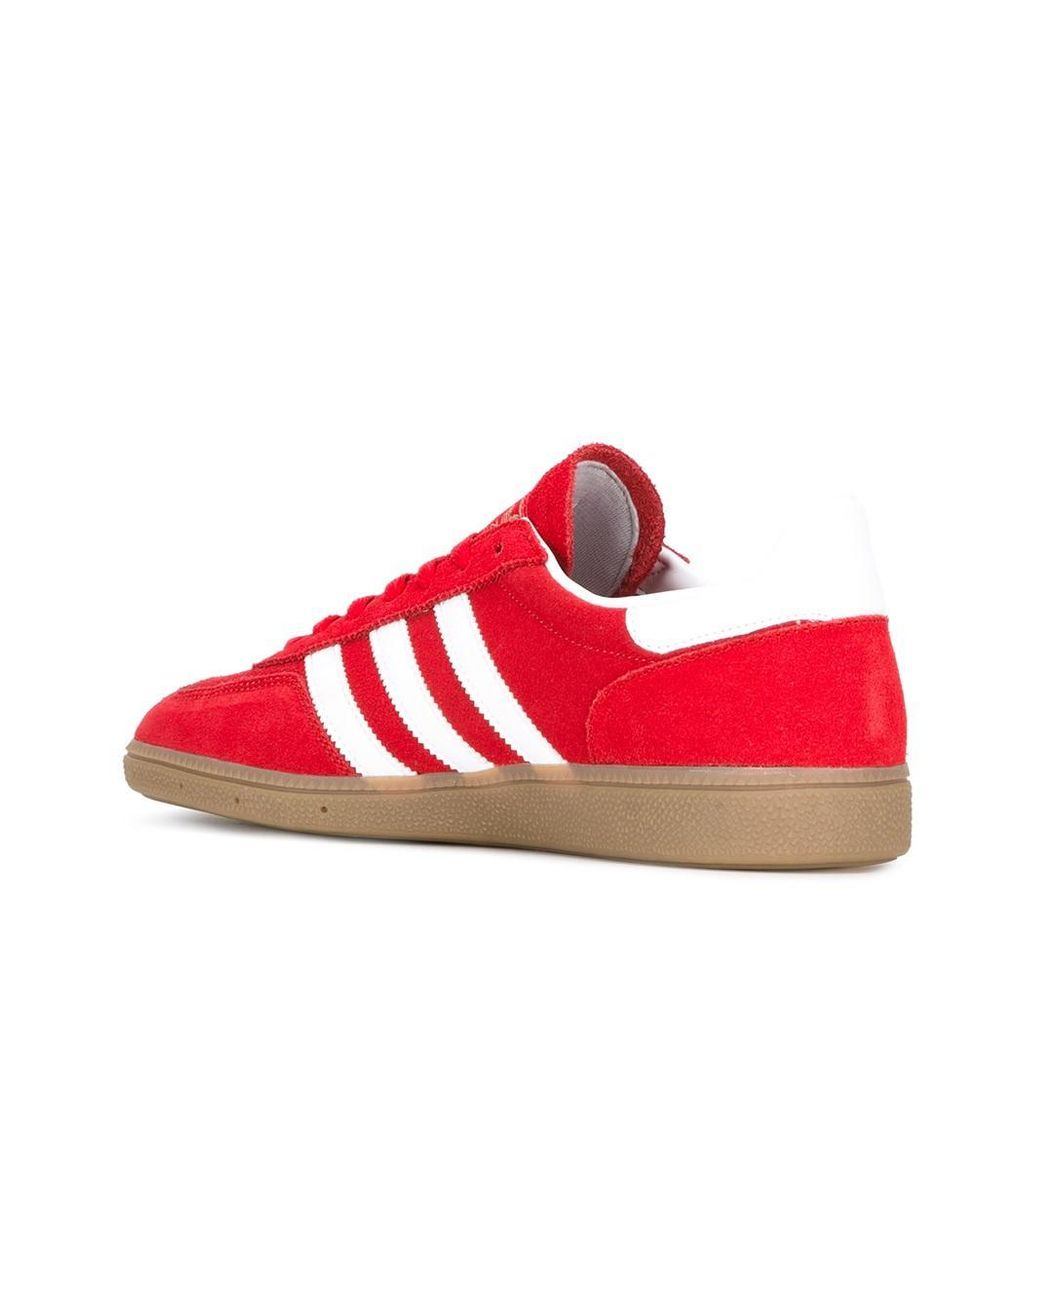 adidas Originals Leather 'handball Spezial' Sneakers in Red for Men | Lyst